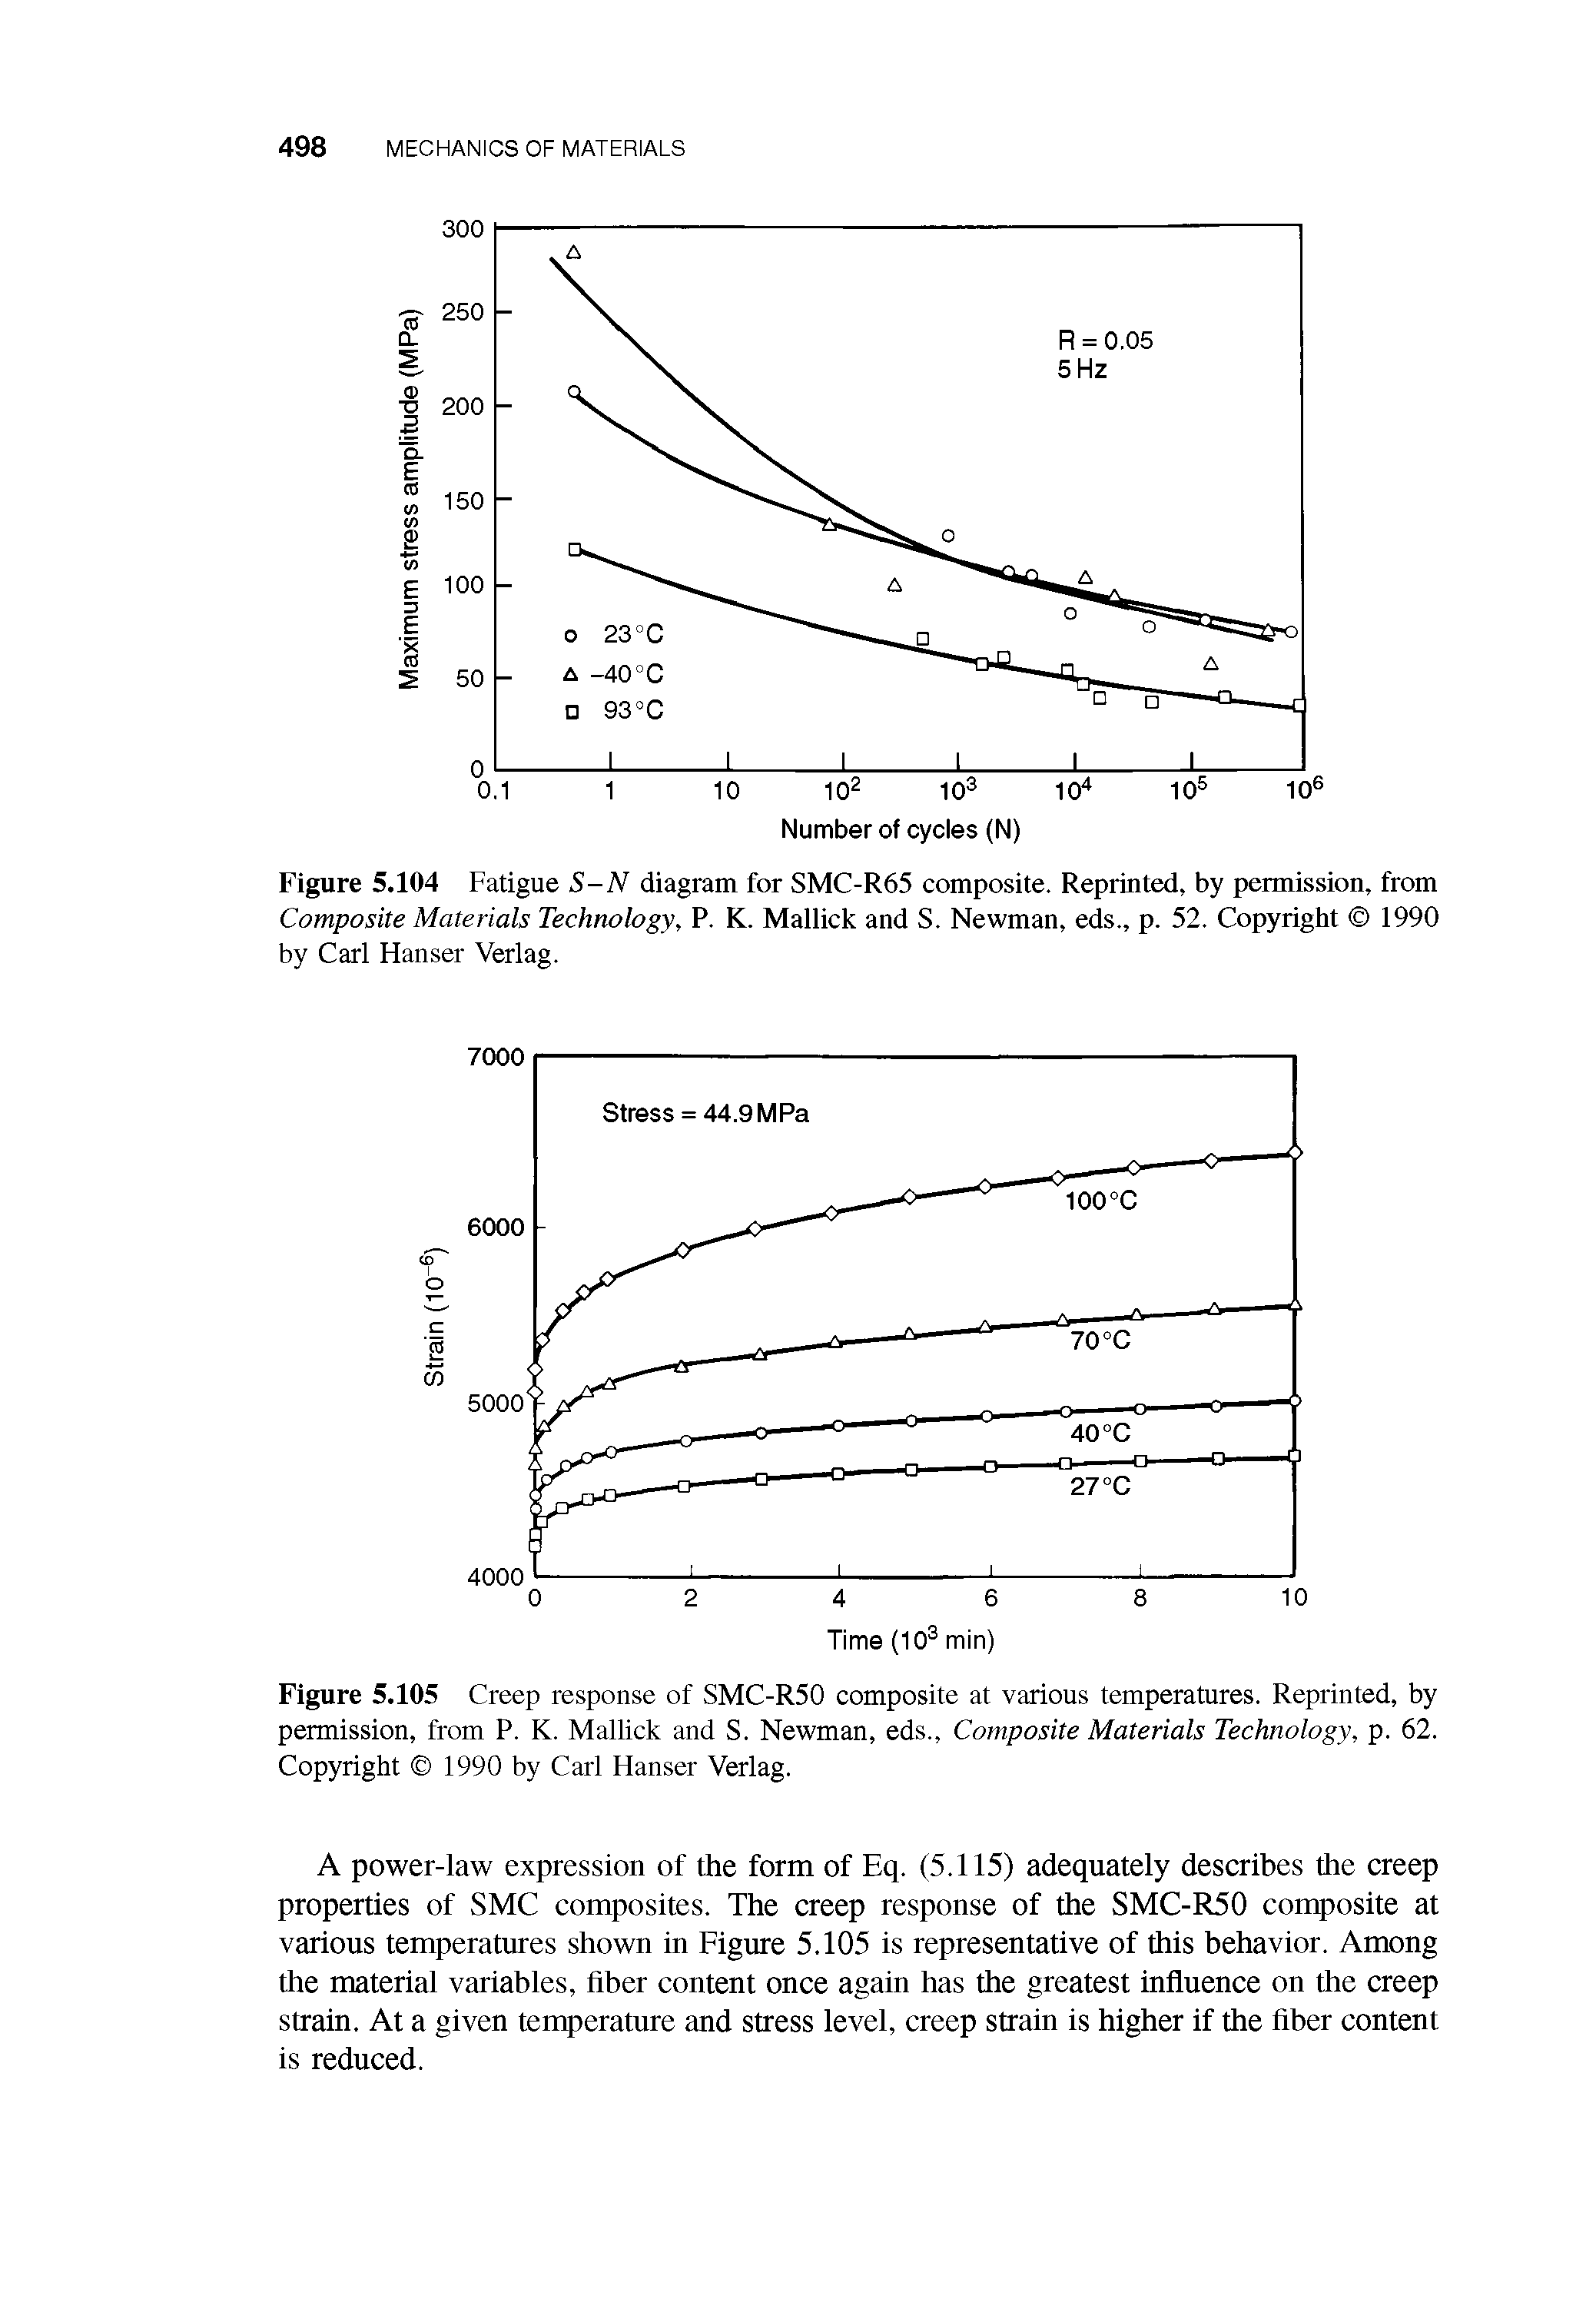 Figure 5.104 Fatigue S-N diagram for SMC-R65 composite. Reprinted, by permission, from Composite Materials Technology, P. K. Mallick and S. Newman, eds., p. 52. Copyright 1990 by Carl Hanser Verlag.